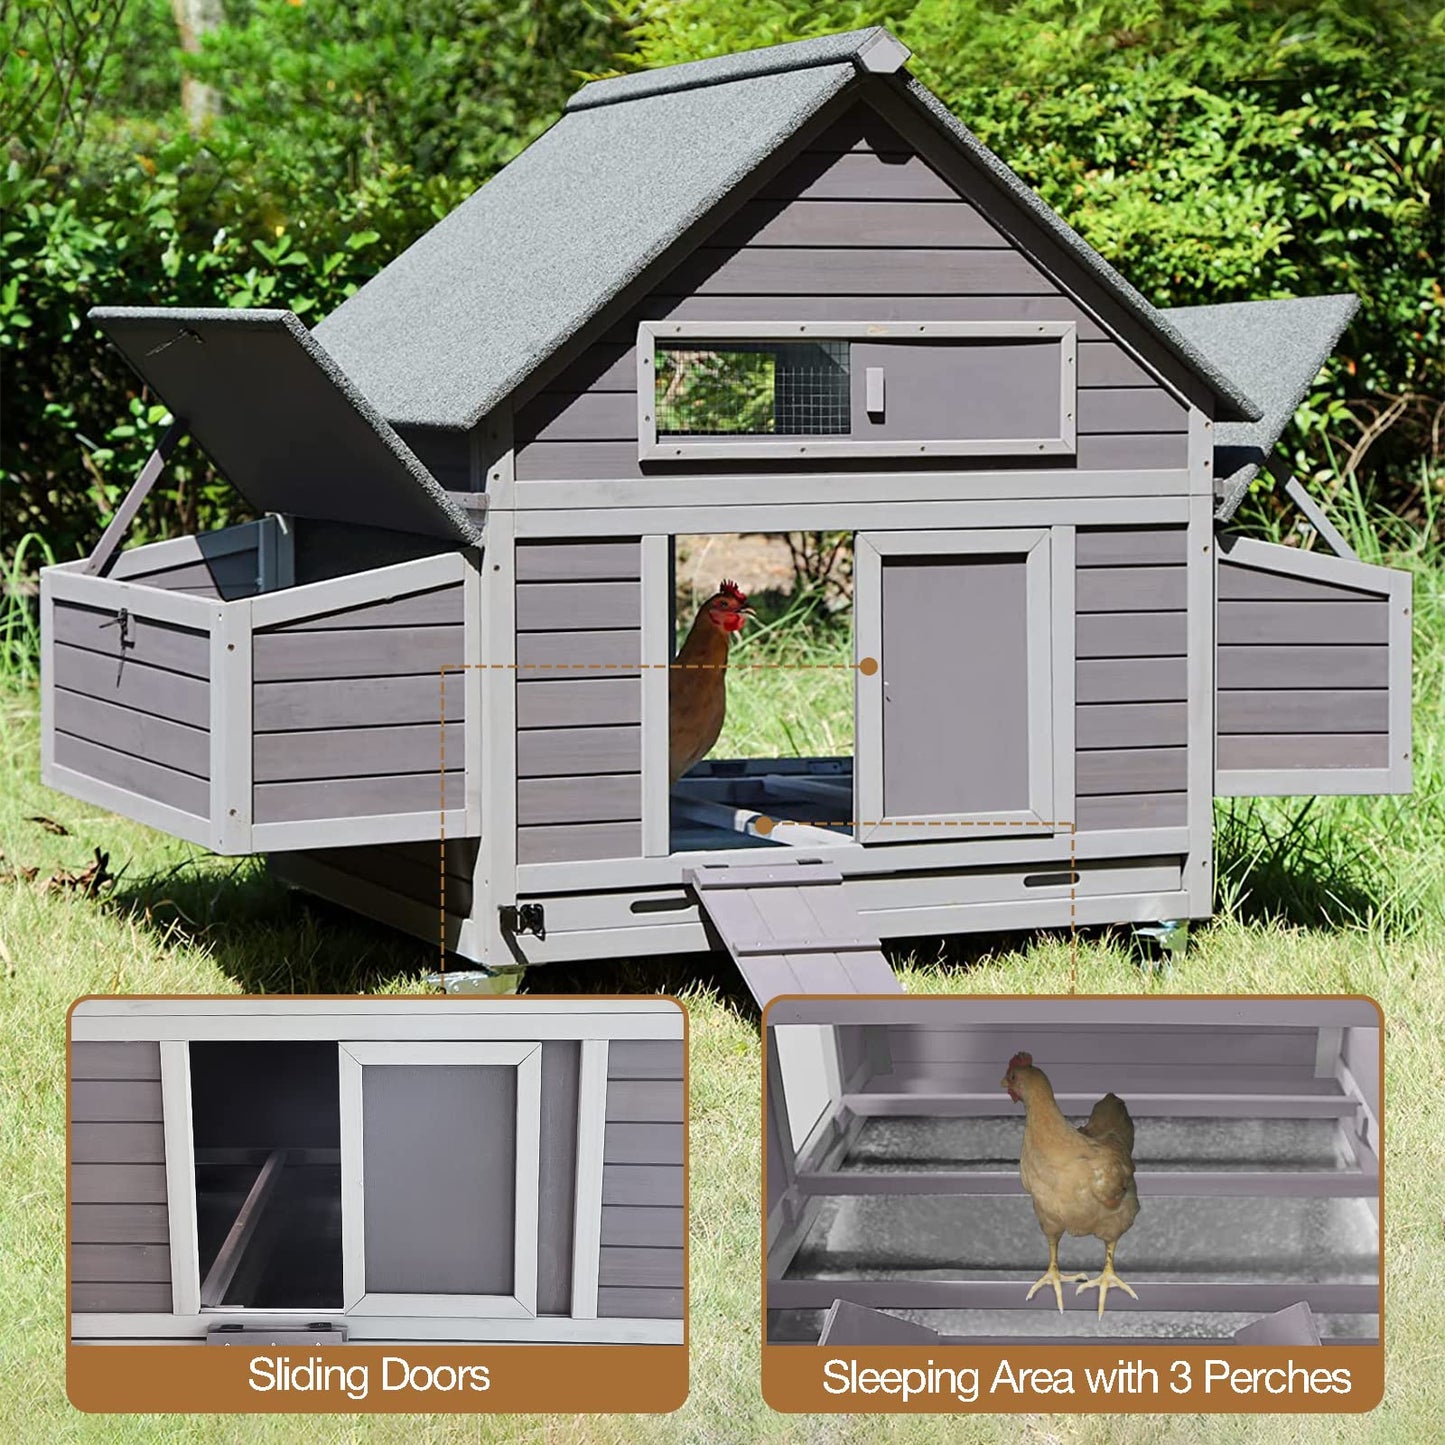 Chicken Coop Poultry Cage on Wheels Outdoor Duck Coop Wooden Hen House with Large Nesting Box, Movable